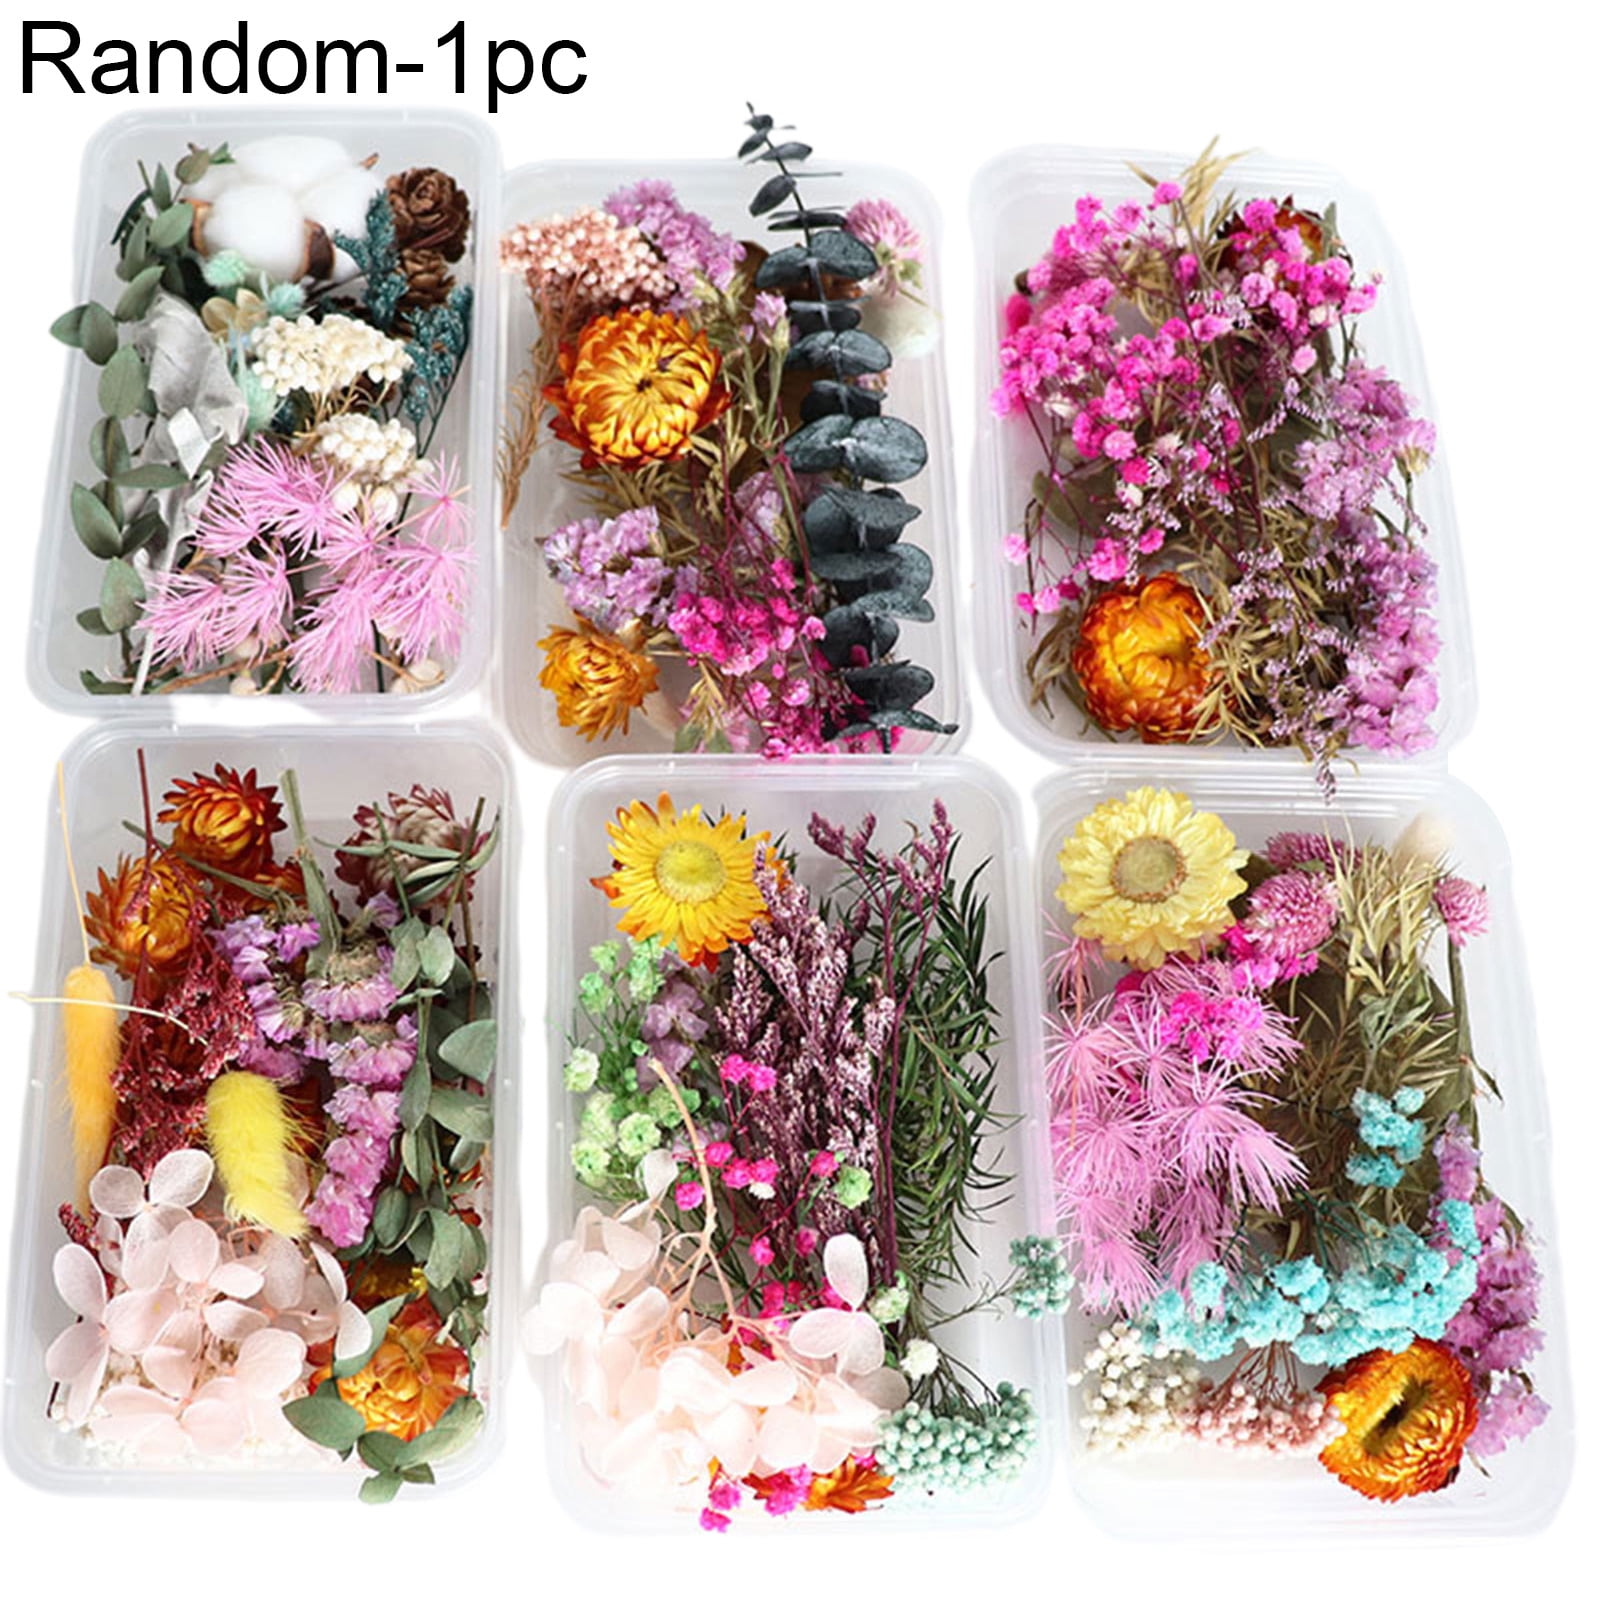 1PC Real Dried Flower Dry Plants For Aromatherapy Candle Epoxy Resin PendantFRFR 